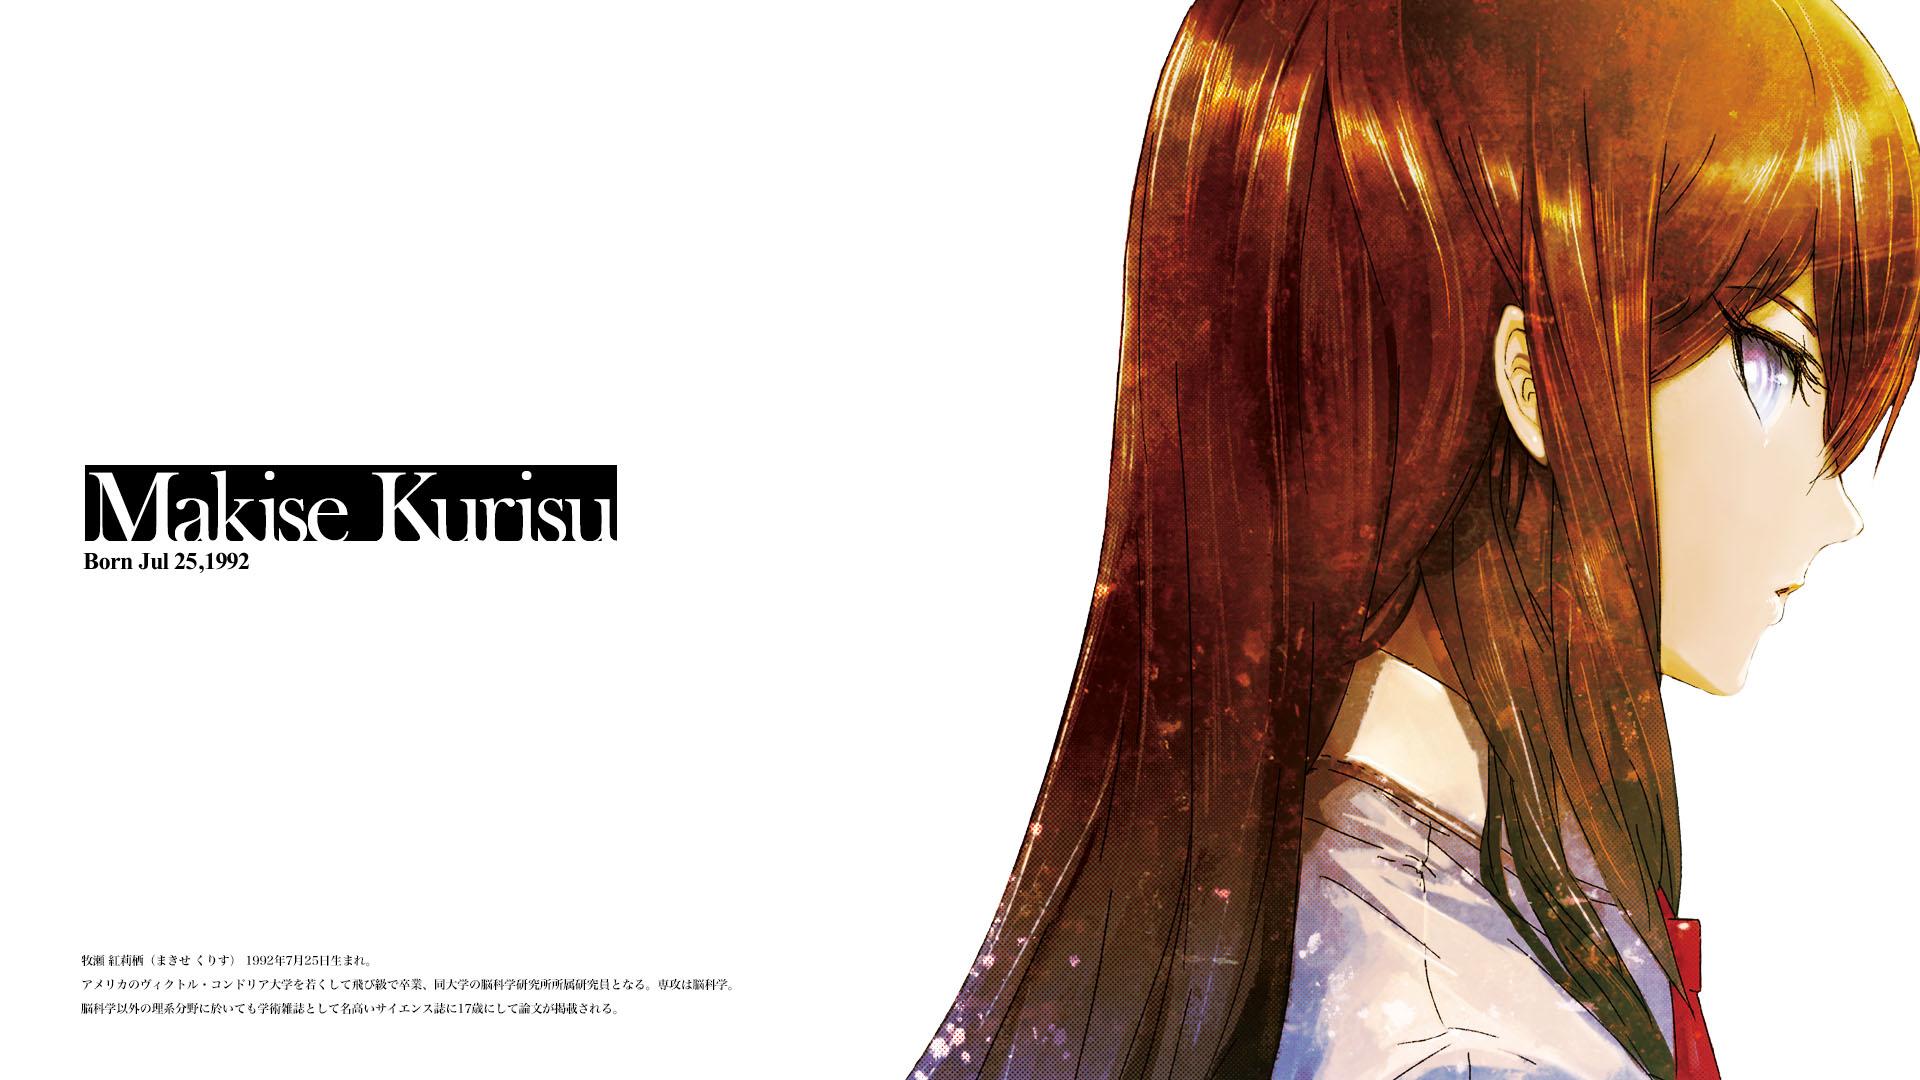 I’m searching for gorgeous Makise Kurisu wallpapers Give me your